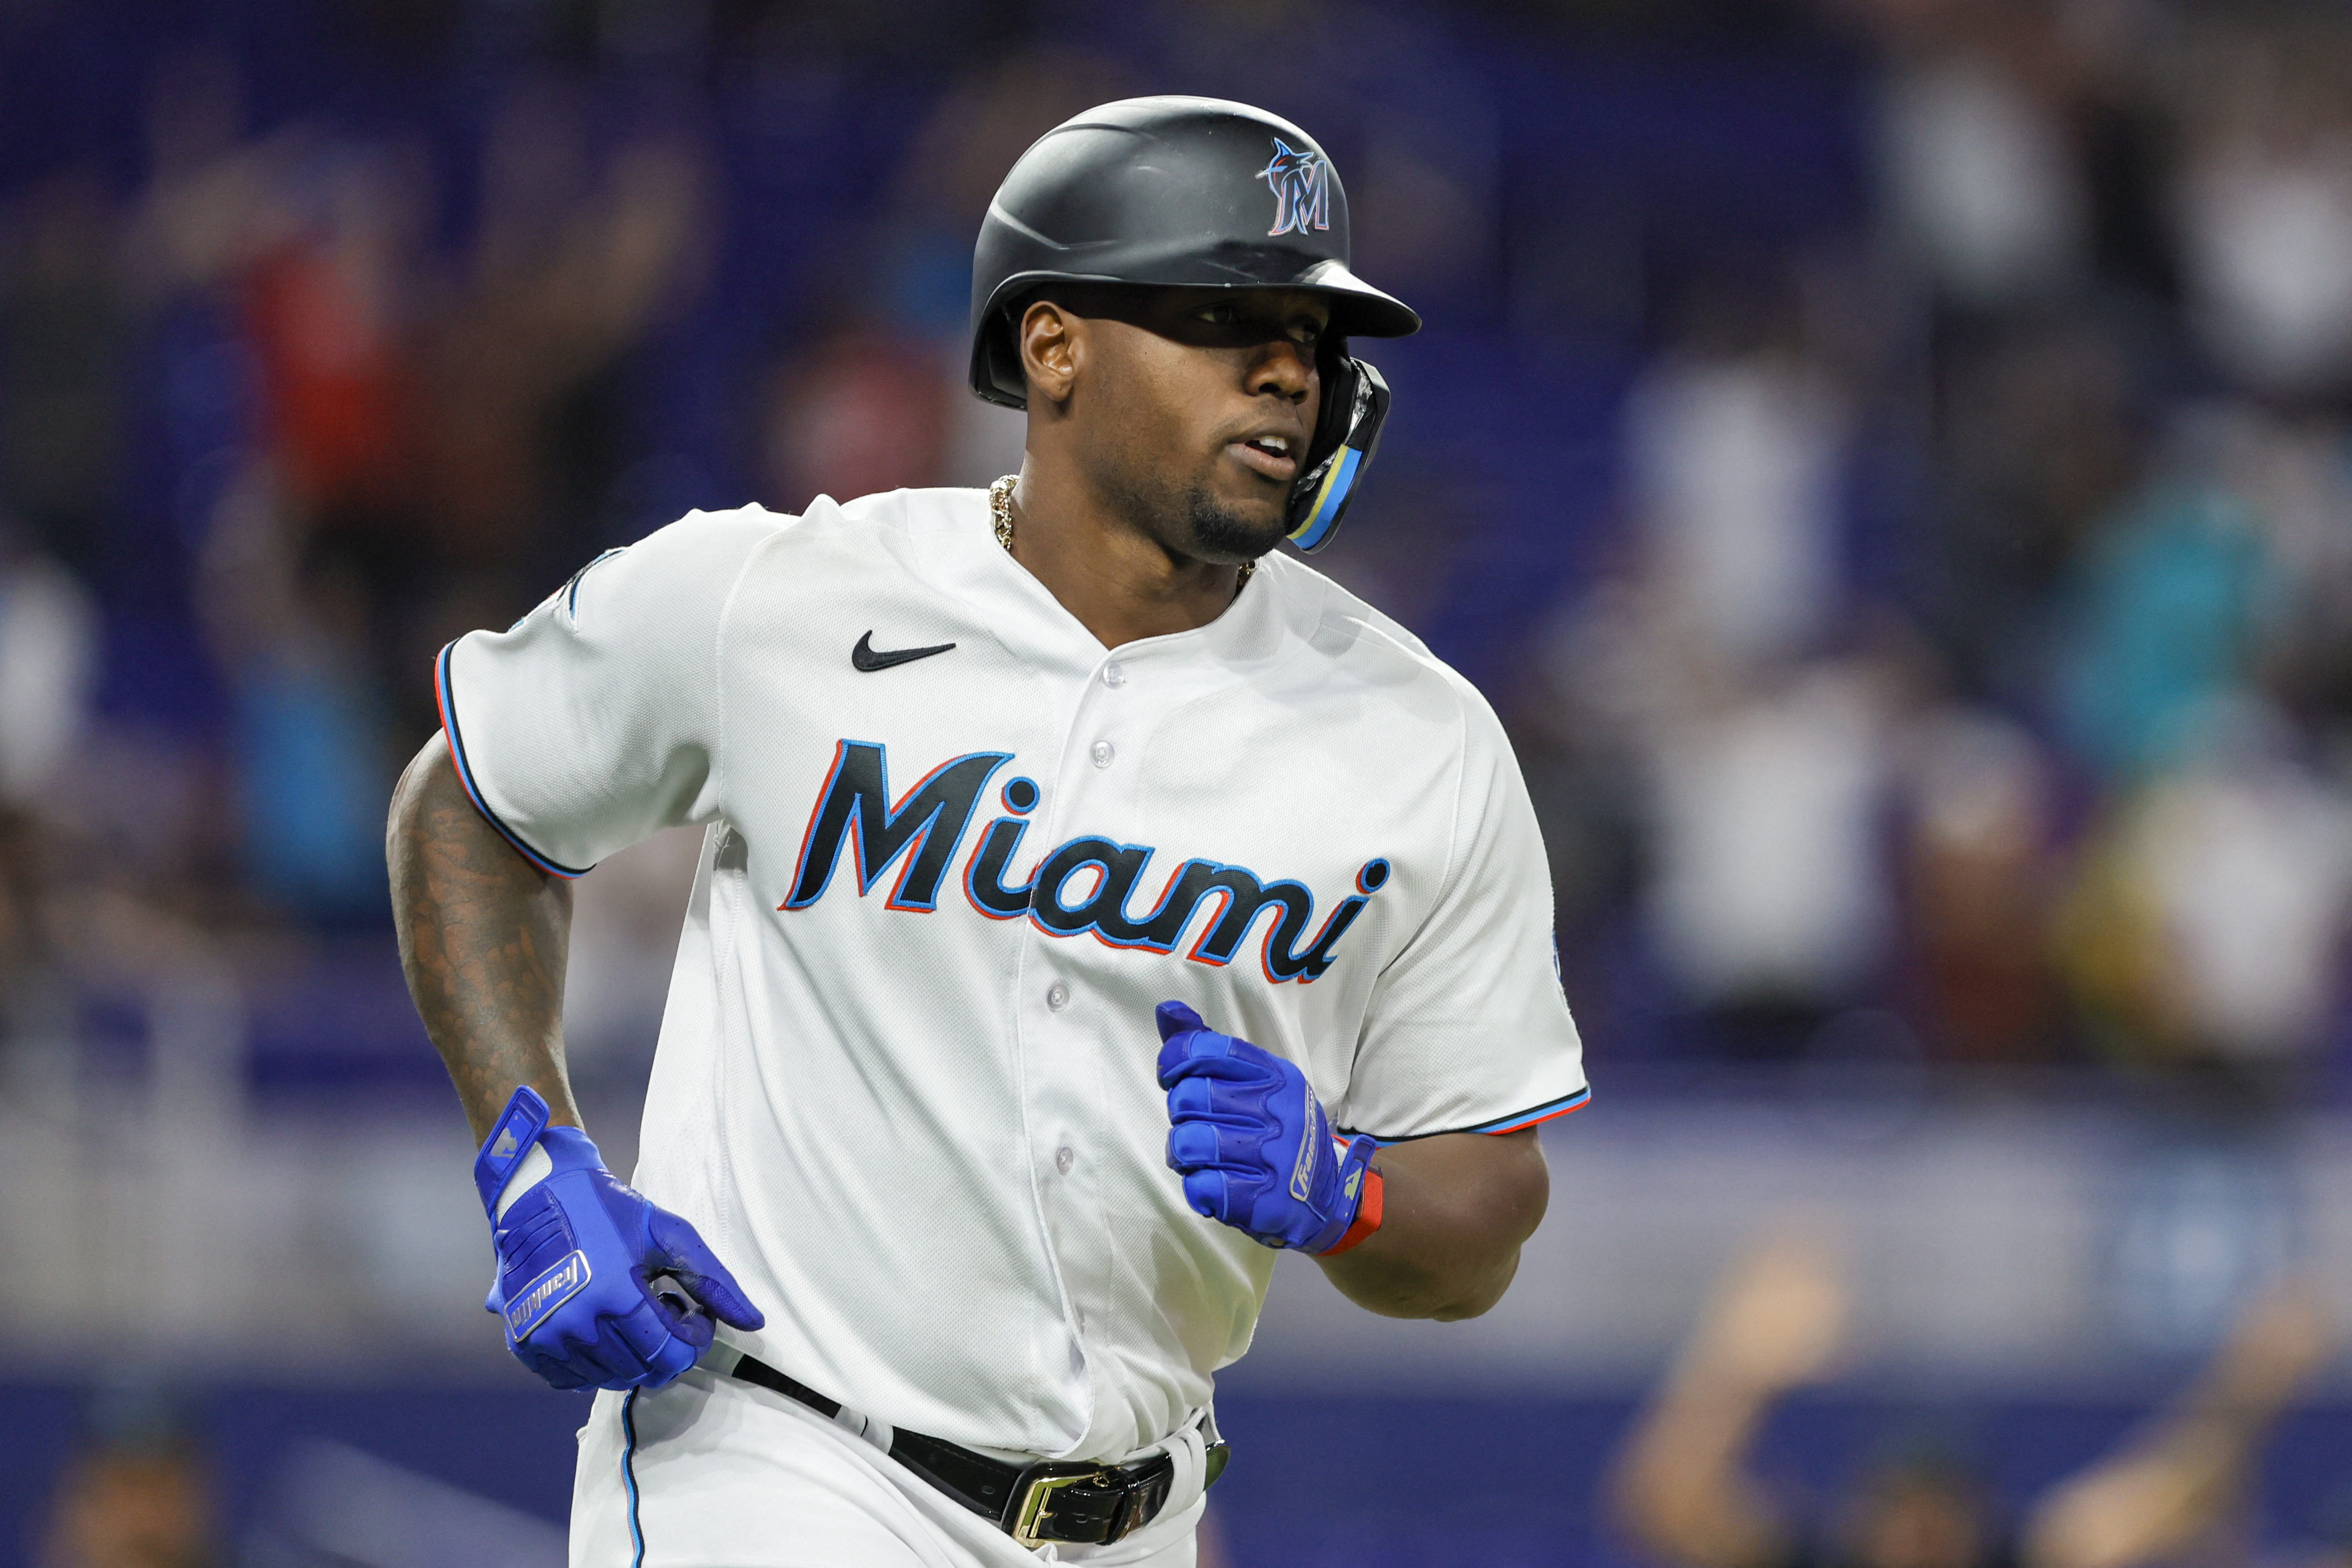 Soler drives in 2 runs as Marlins end Phillies' franchise-tying